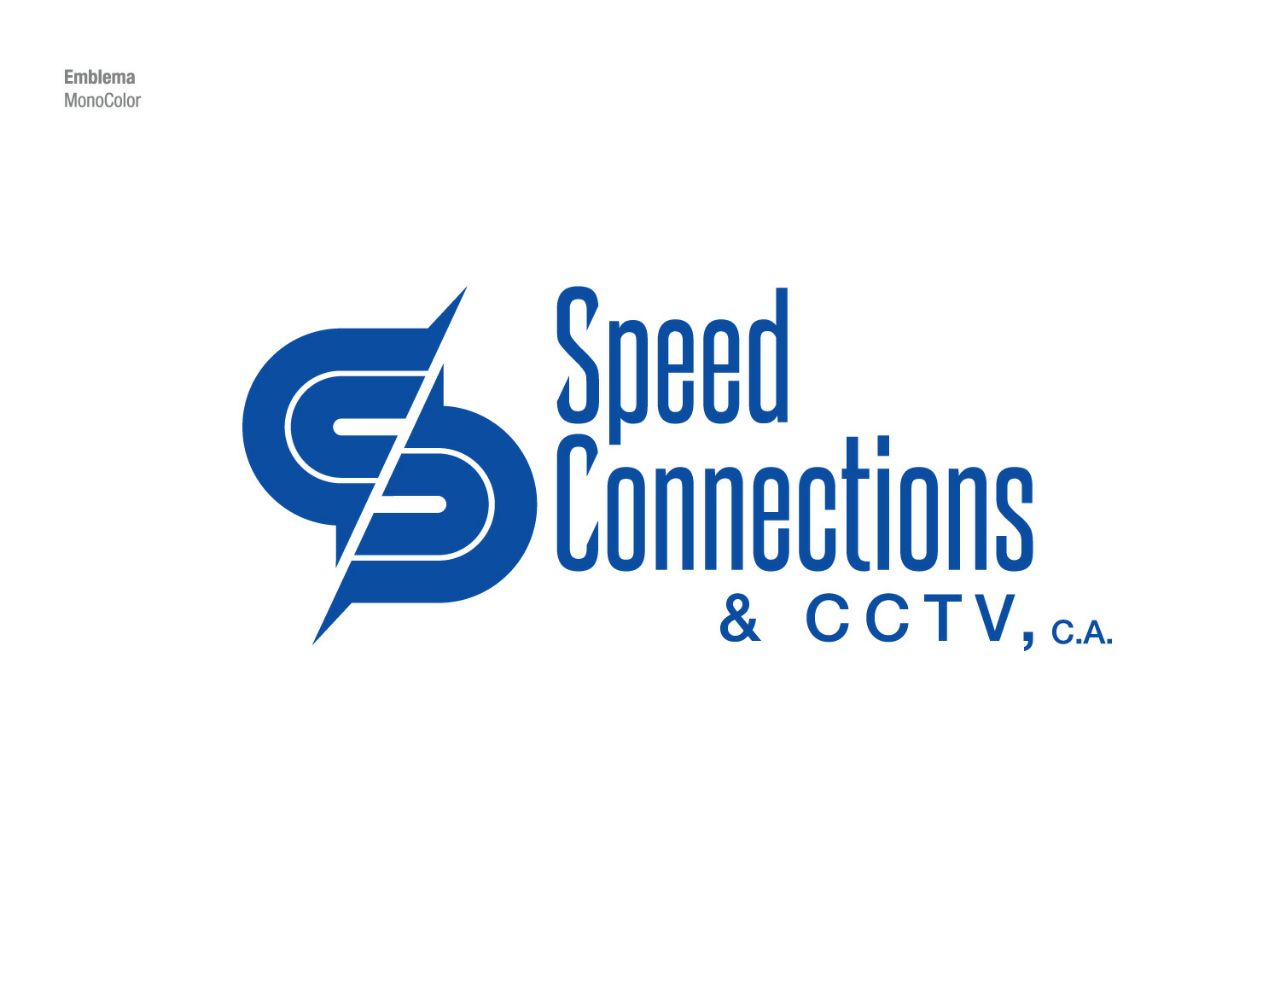 SPEED CONNECTIONS & CCTV,C.A